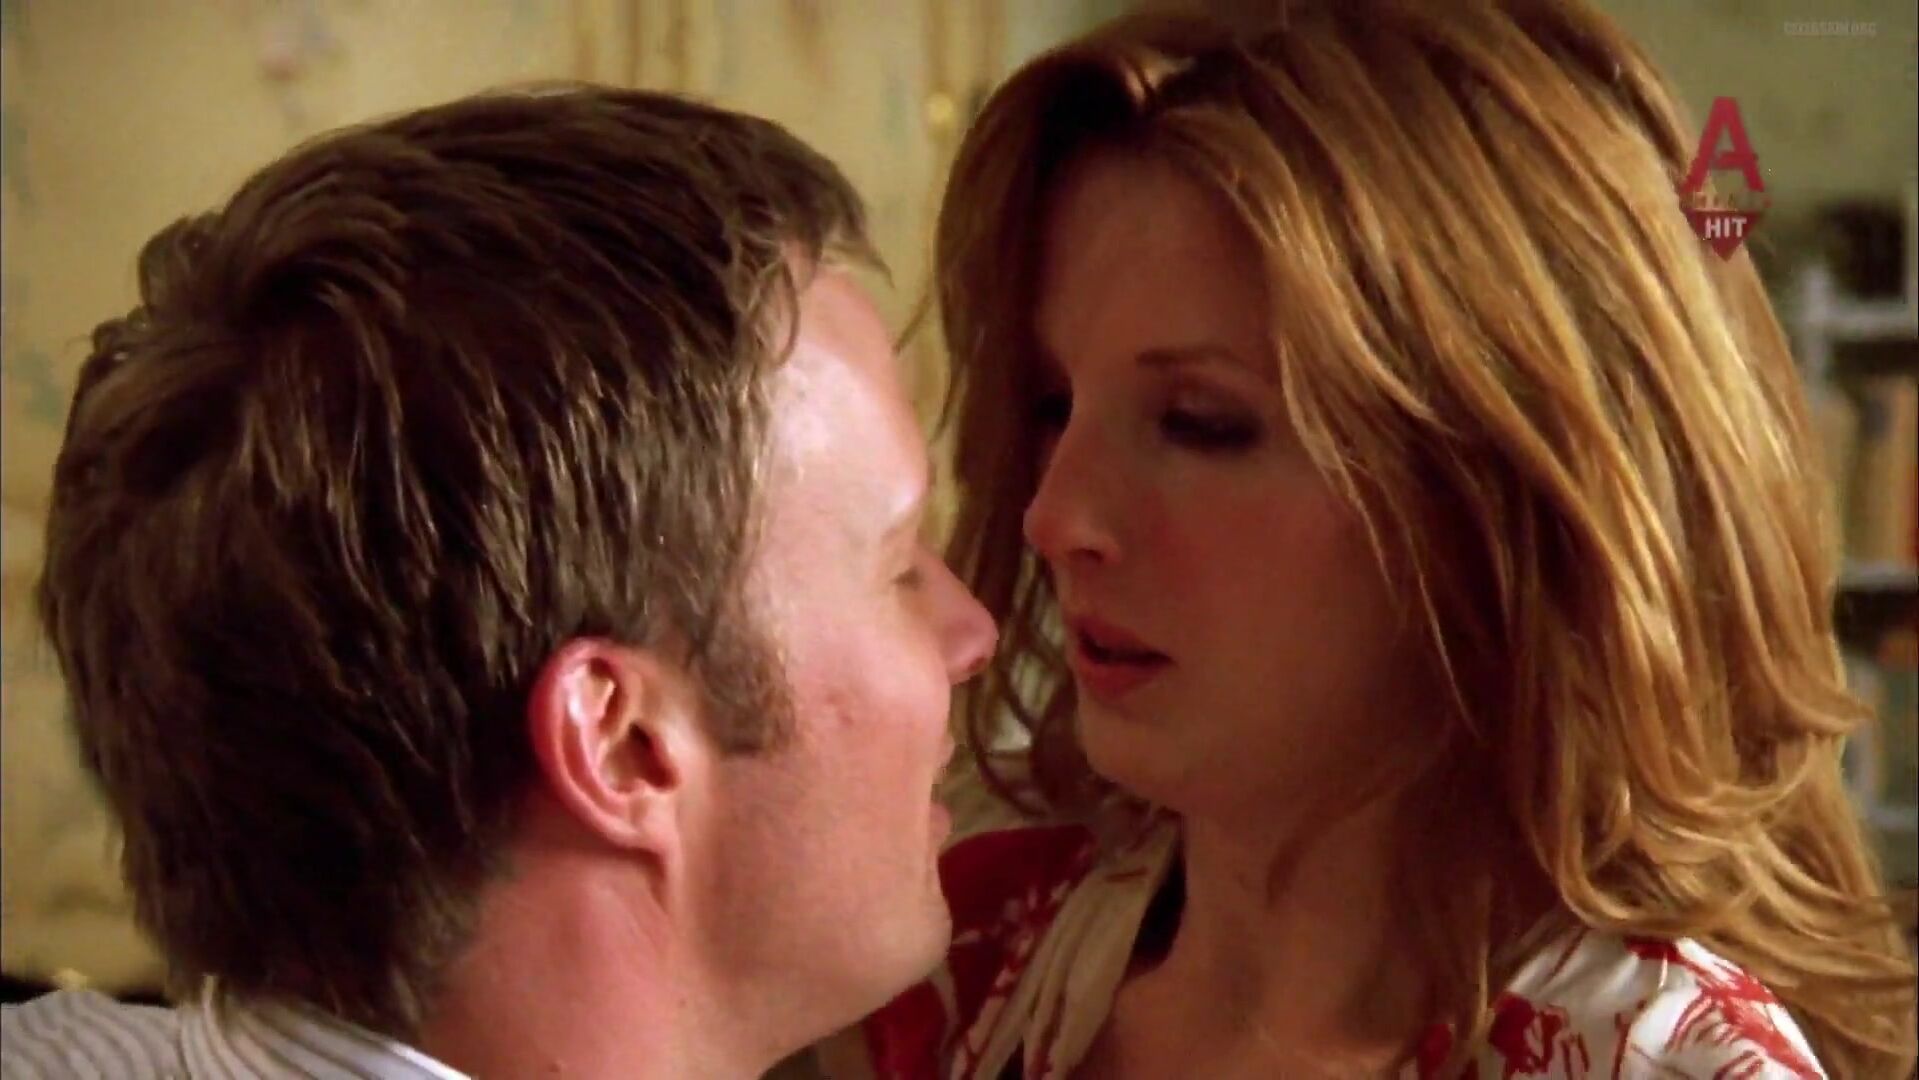 Bro Redhead Kelly Reilly visits lover every day to be penetrated in Joe's Palace (2007) Stepsister - 1